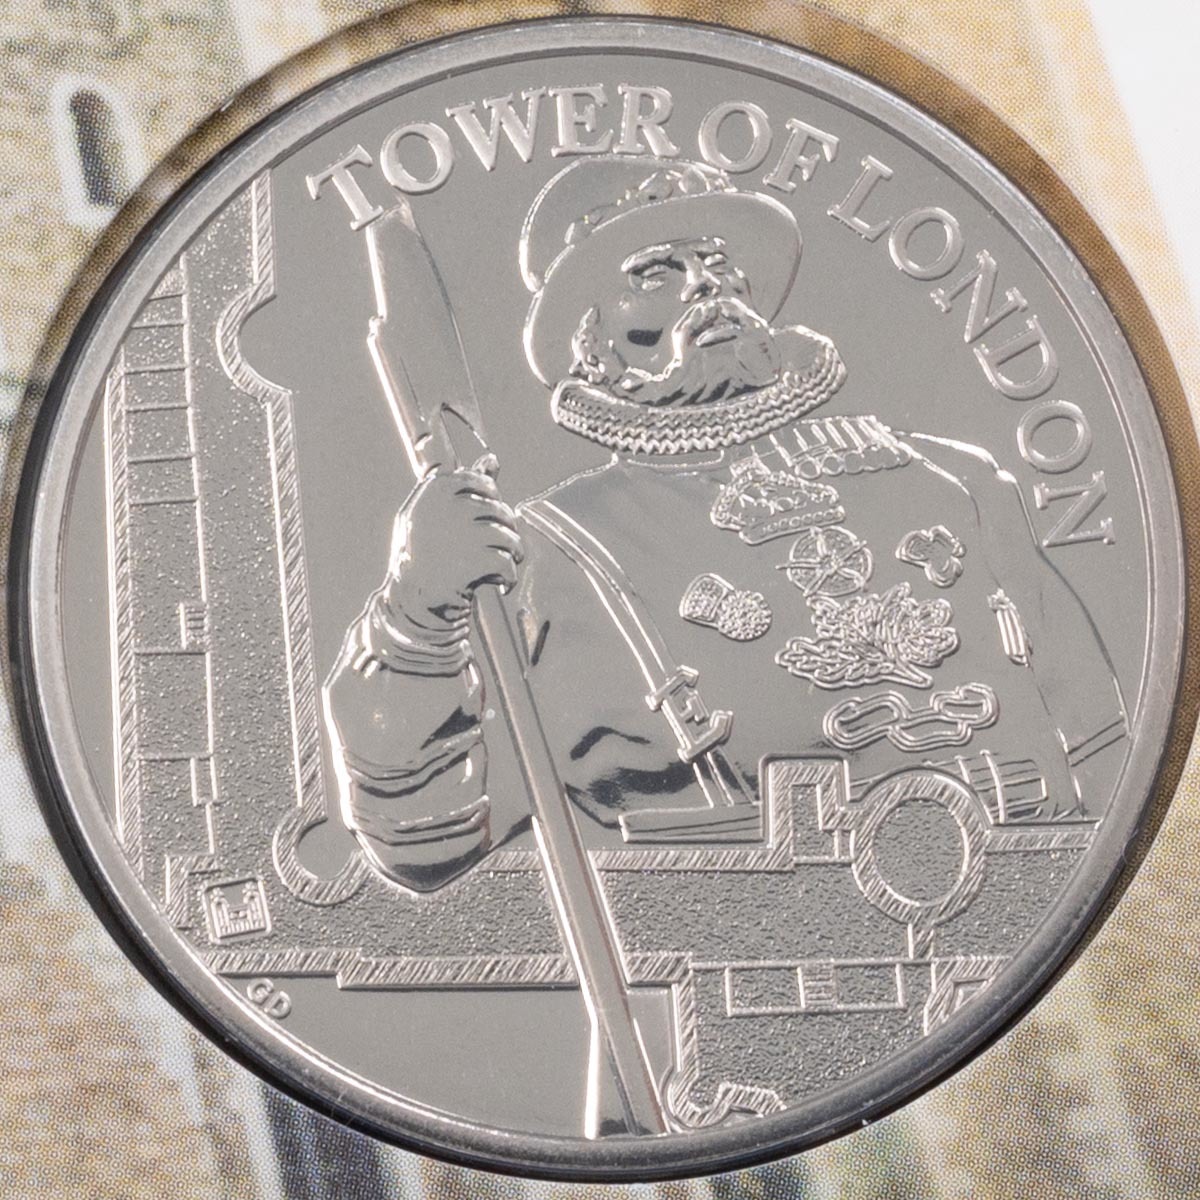 UK19YWBU 2019 Tower Of London Yeoman Warders Five Pound Crown Brilliant Uncirculated Coin In Folder Reverse